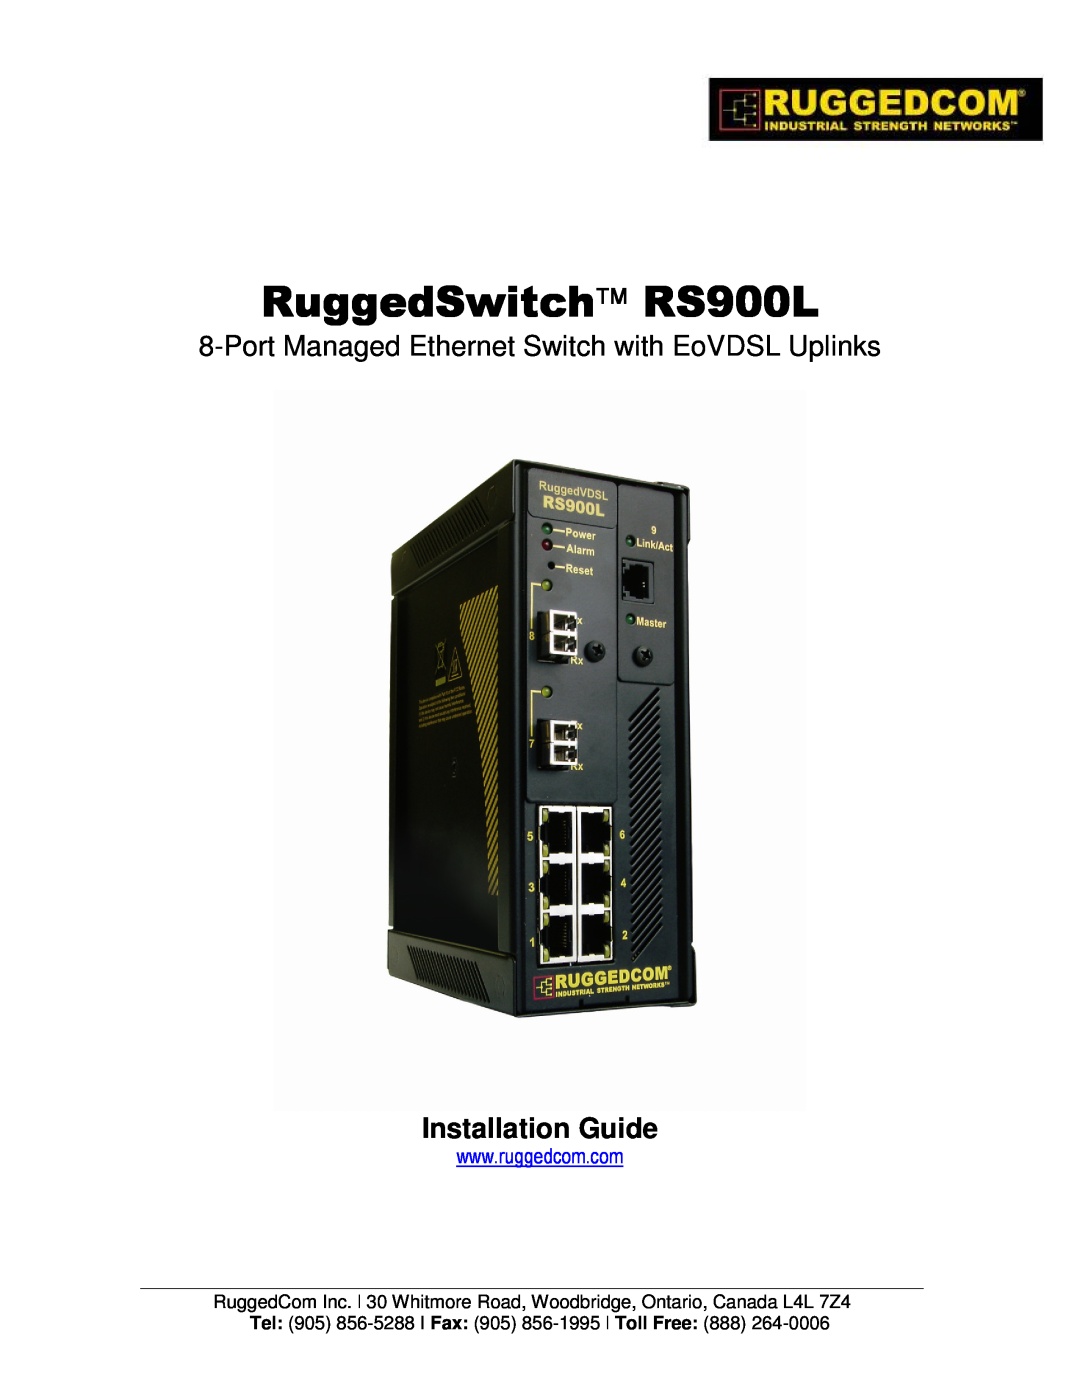 RuggedCom manual Installation Guide, RuggedSwitch RS900L, Port Managed Ethernet Switch with EoVDSL Uplinks 